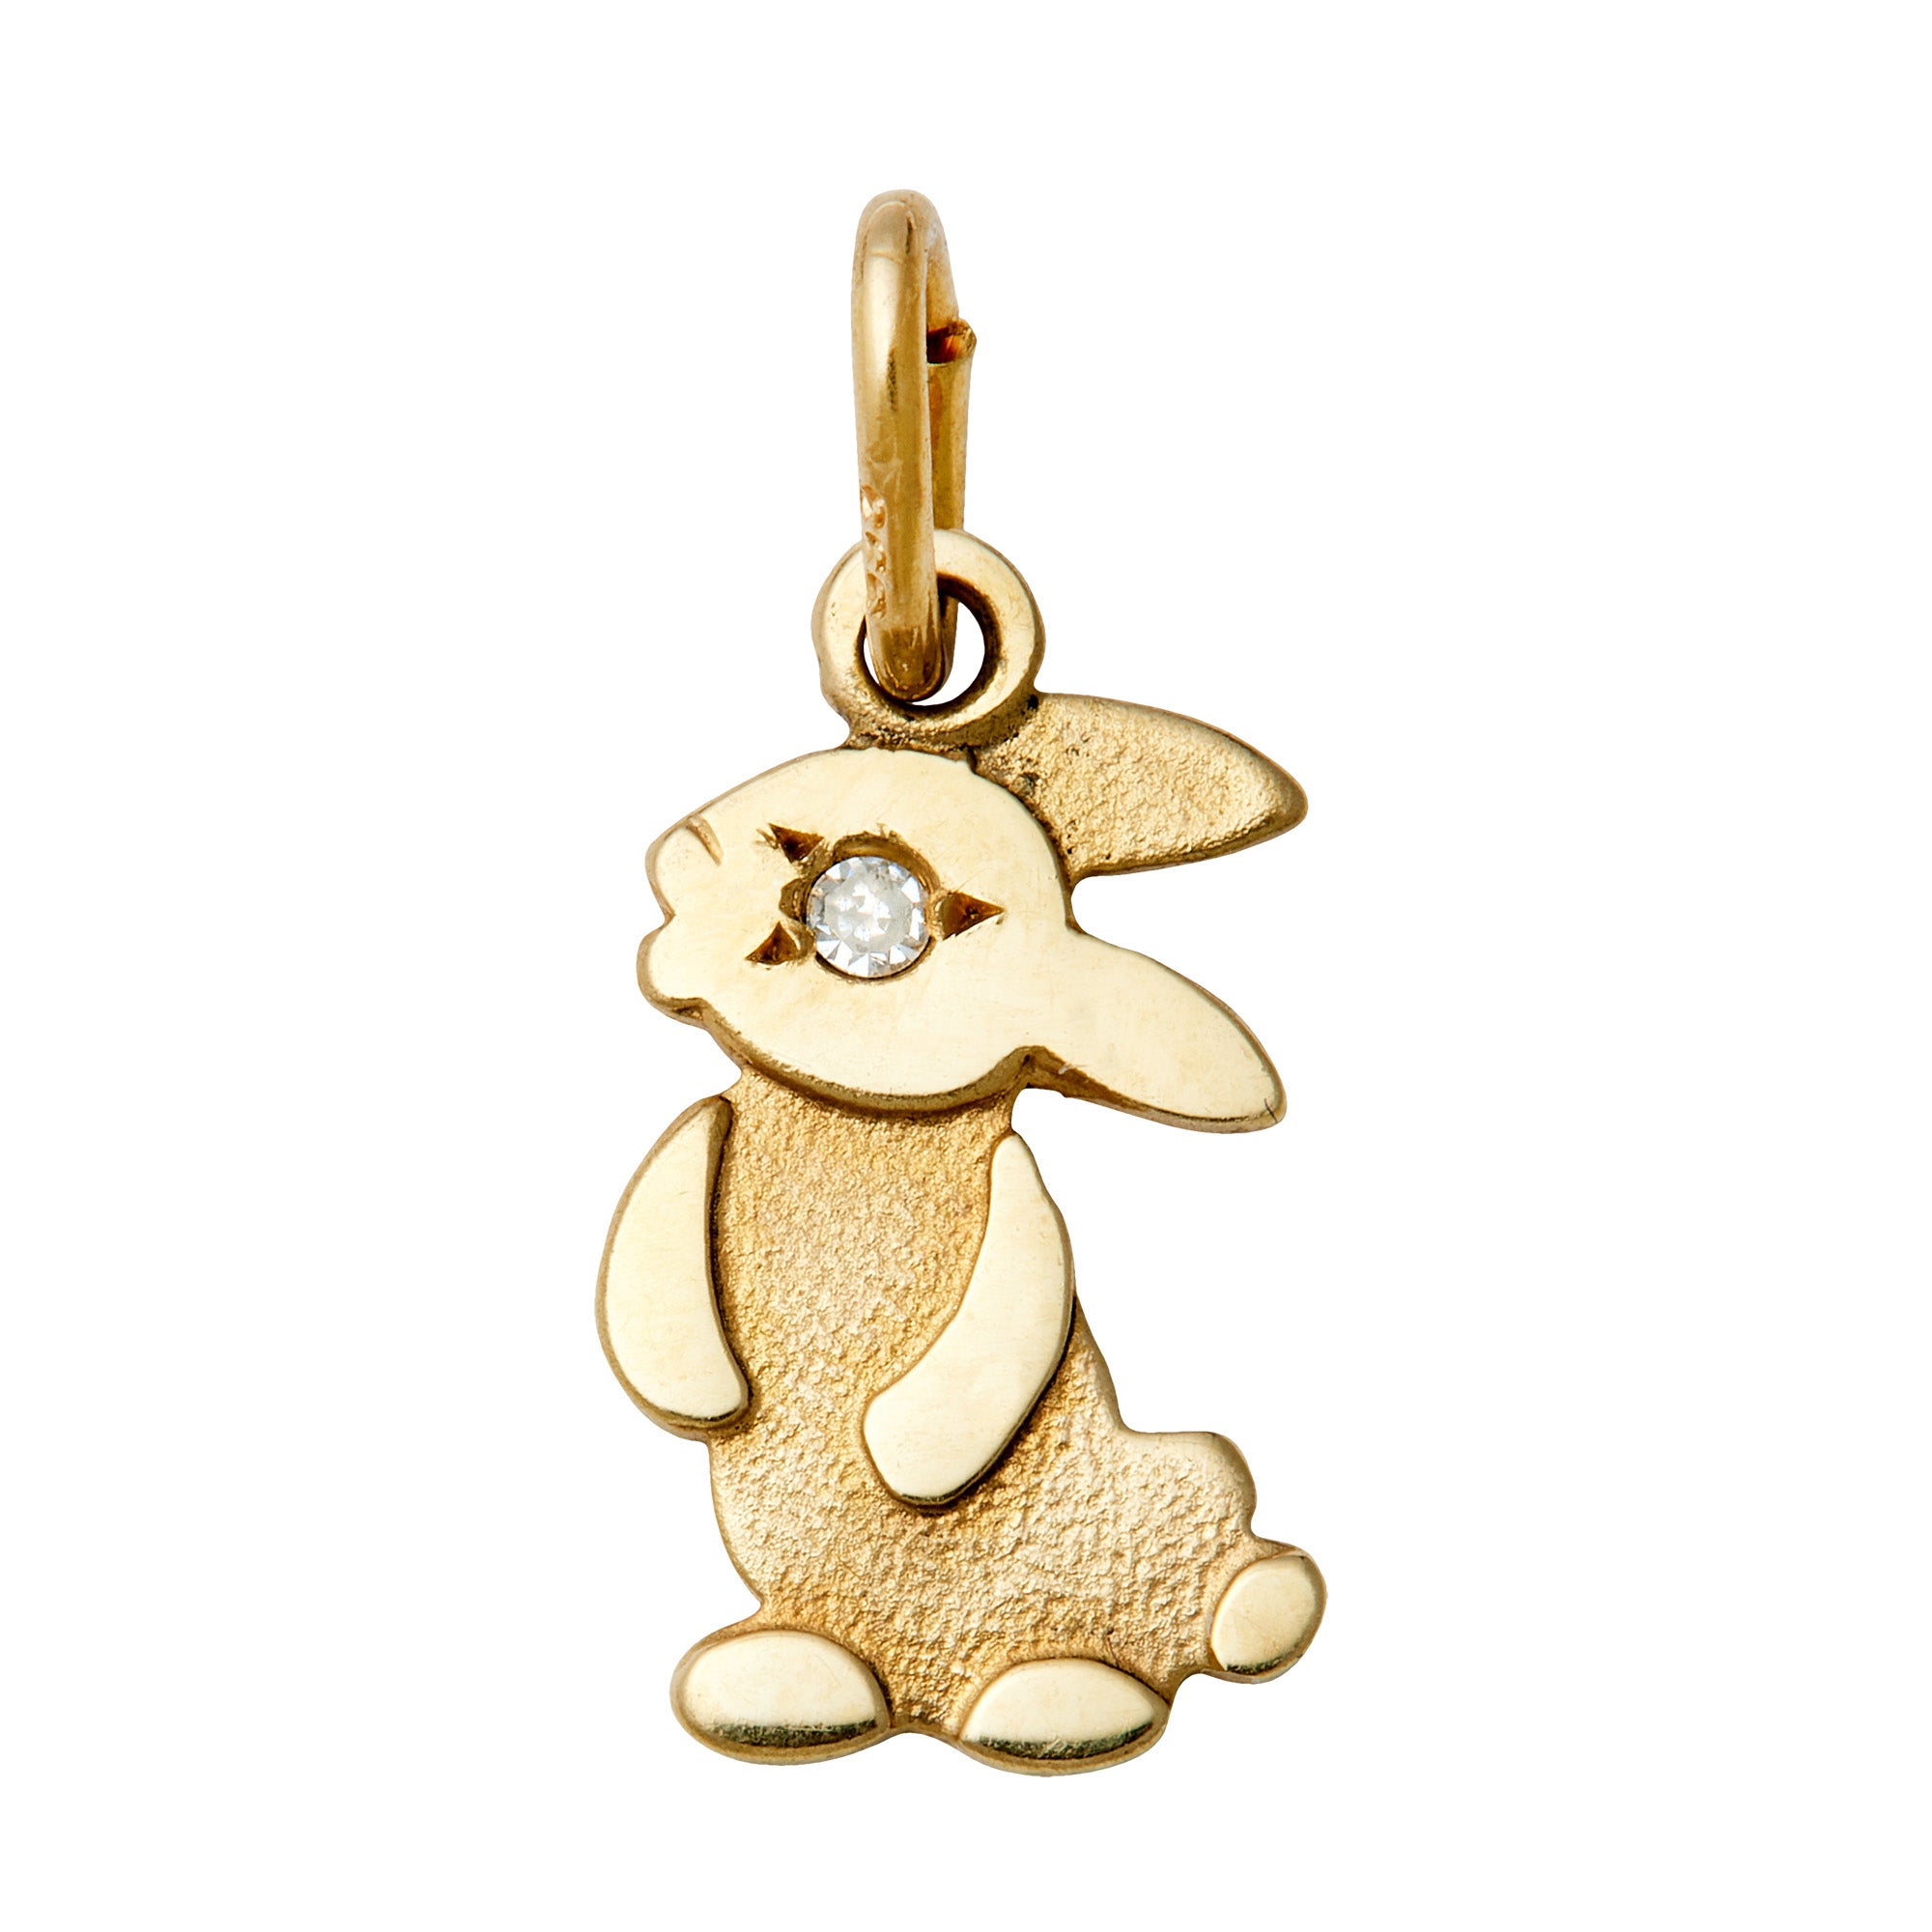 Solid 14K Yellow Gold Bunny Charm with a Diamond Eye